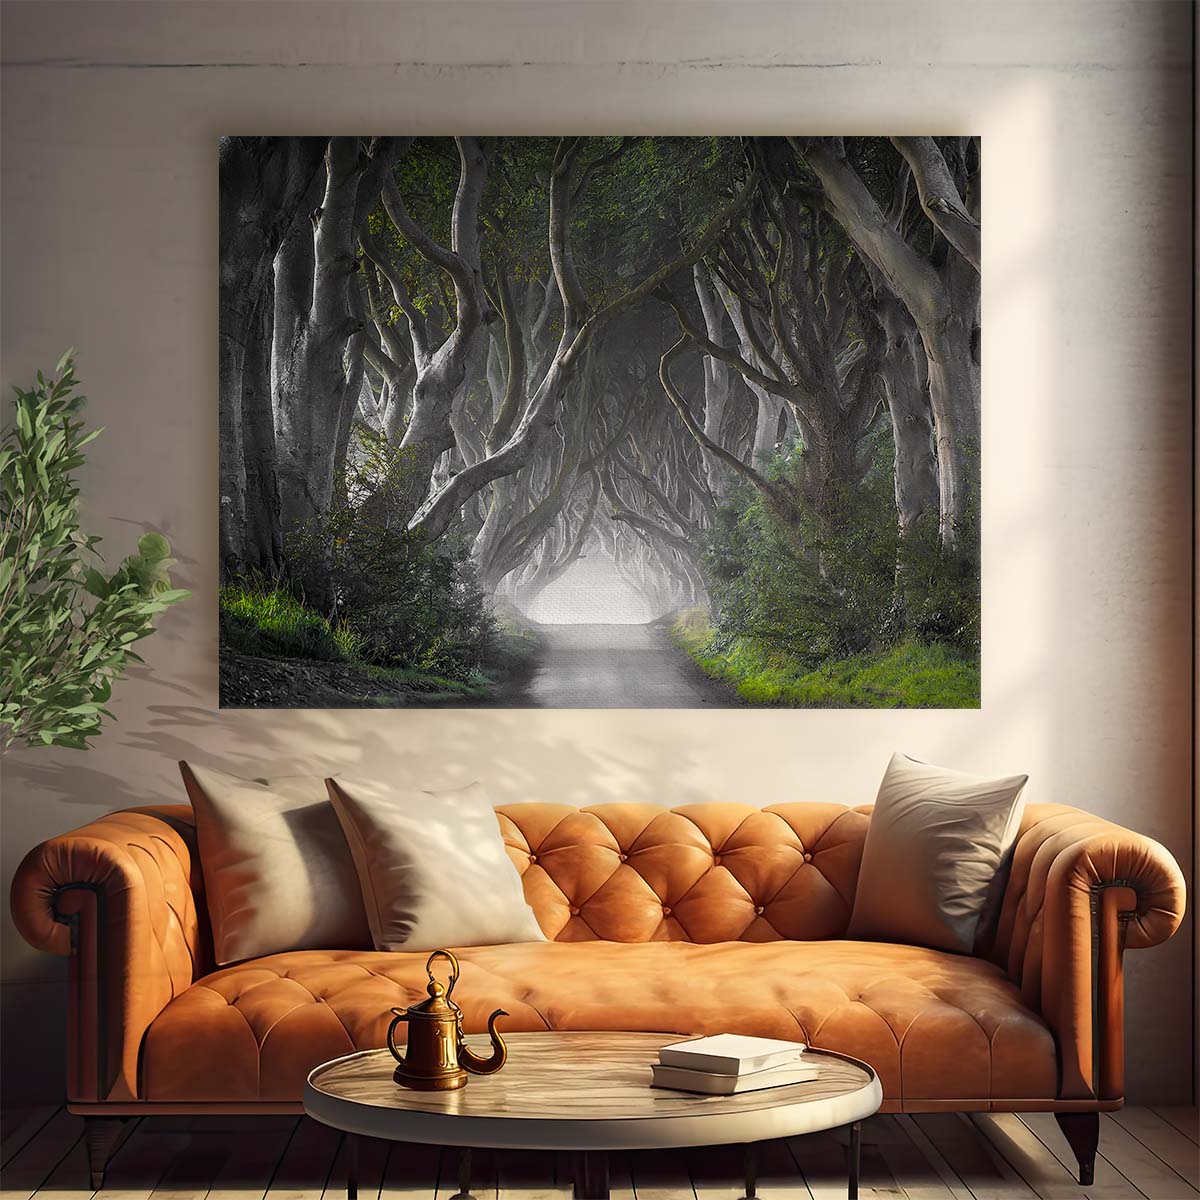 Enchanted Bregagh Road Dark Hedges Ireland Wall Art by Luxuriance Designs. Made in USA.